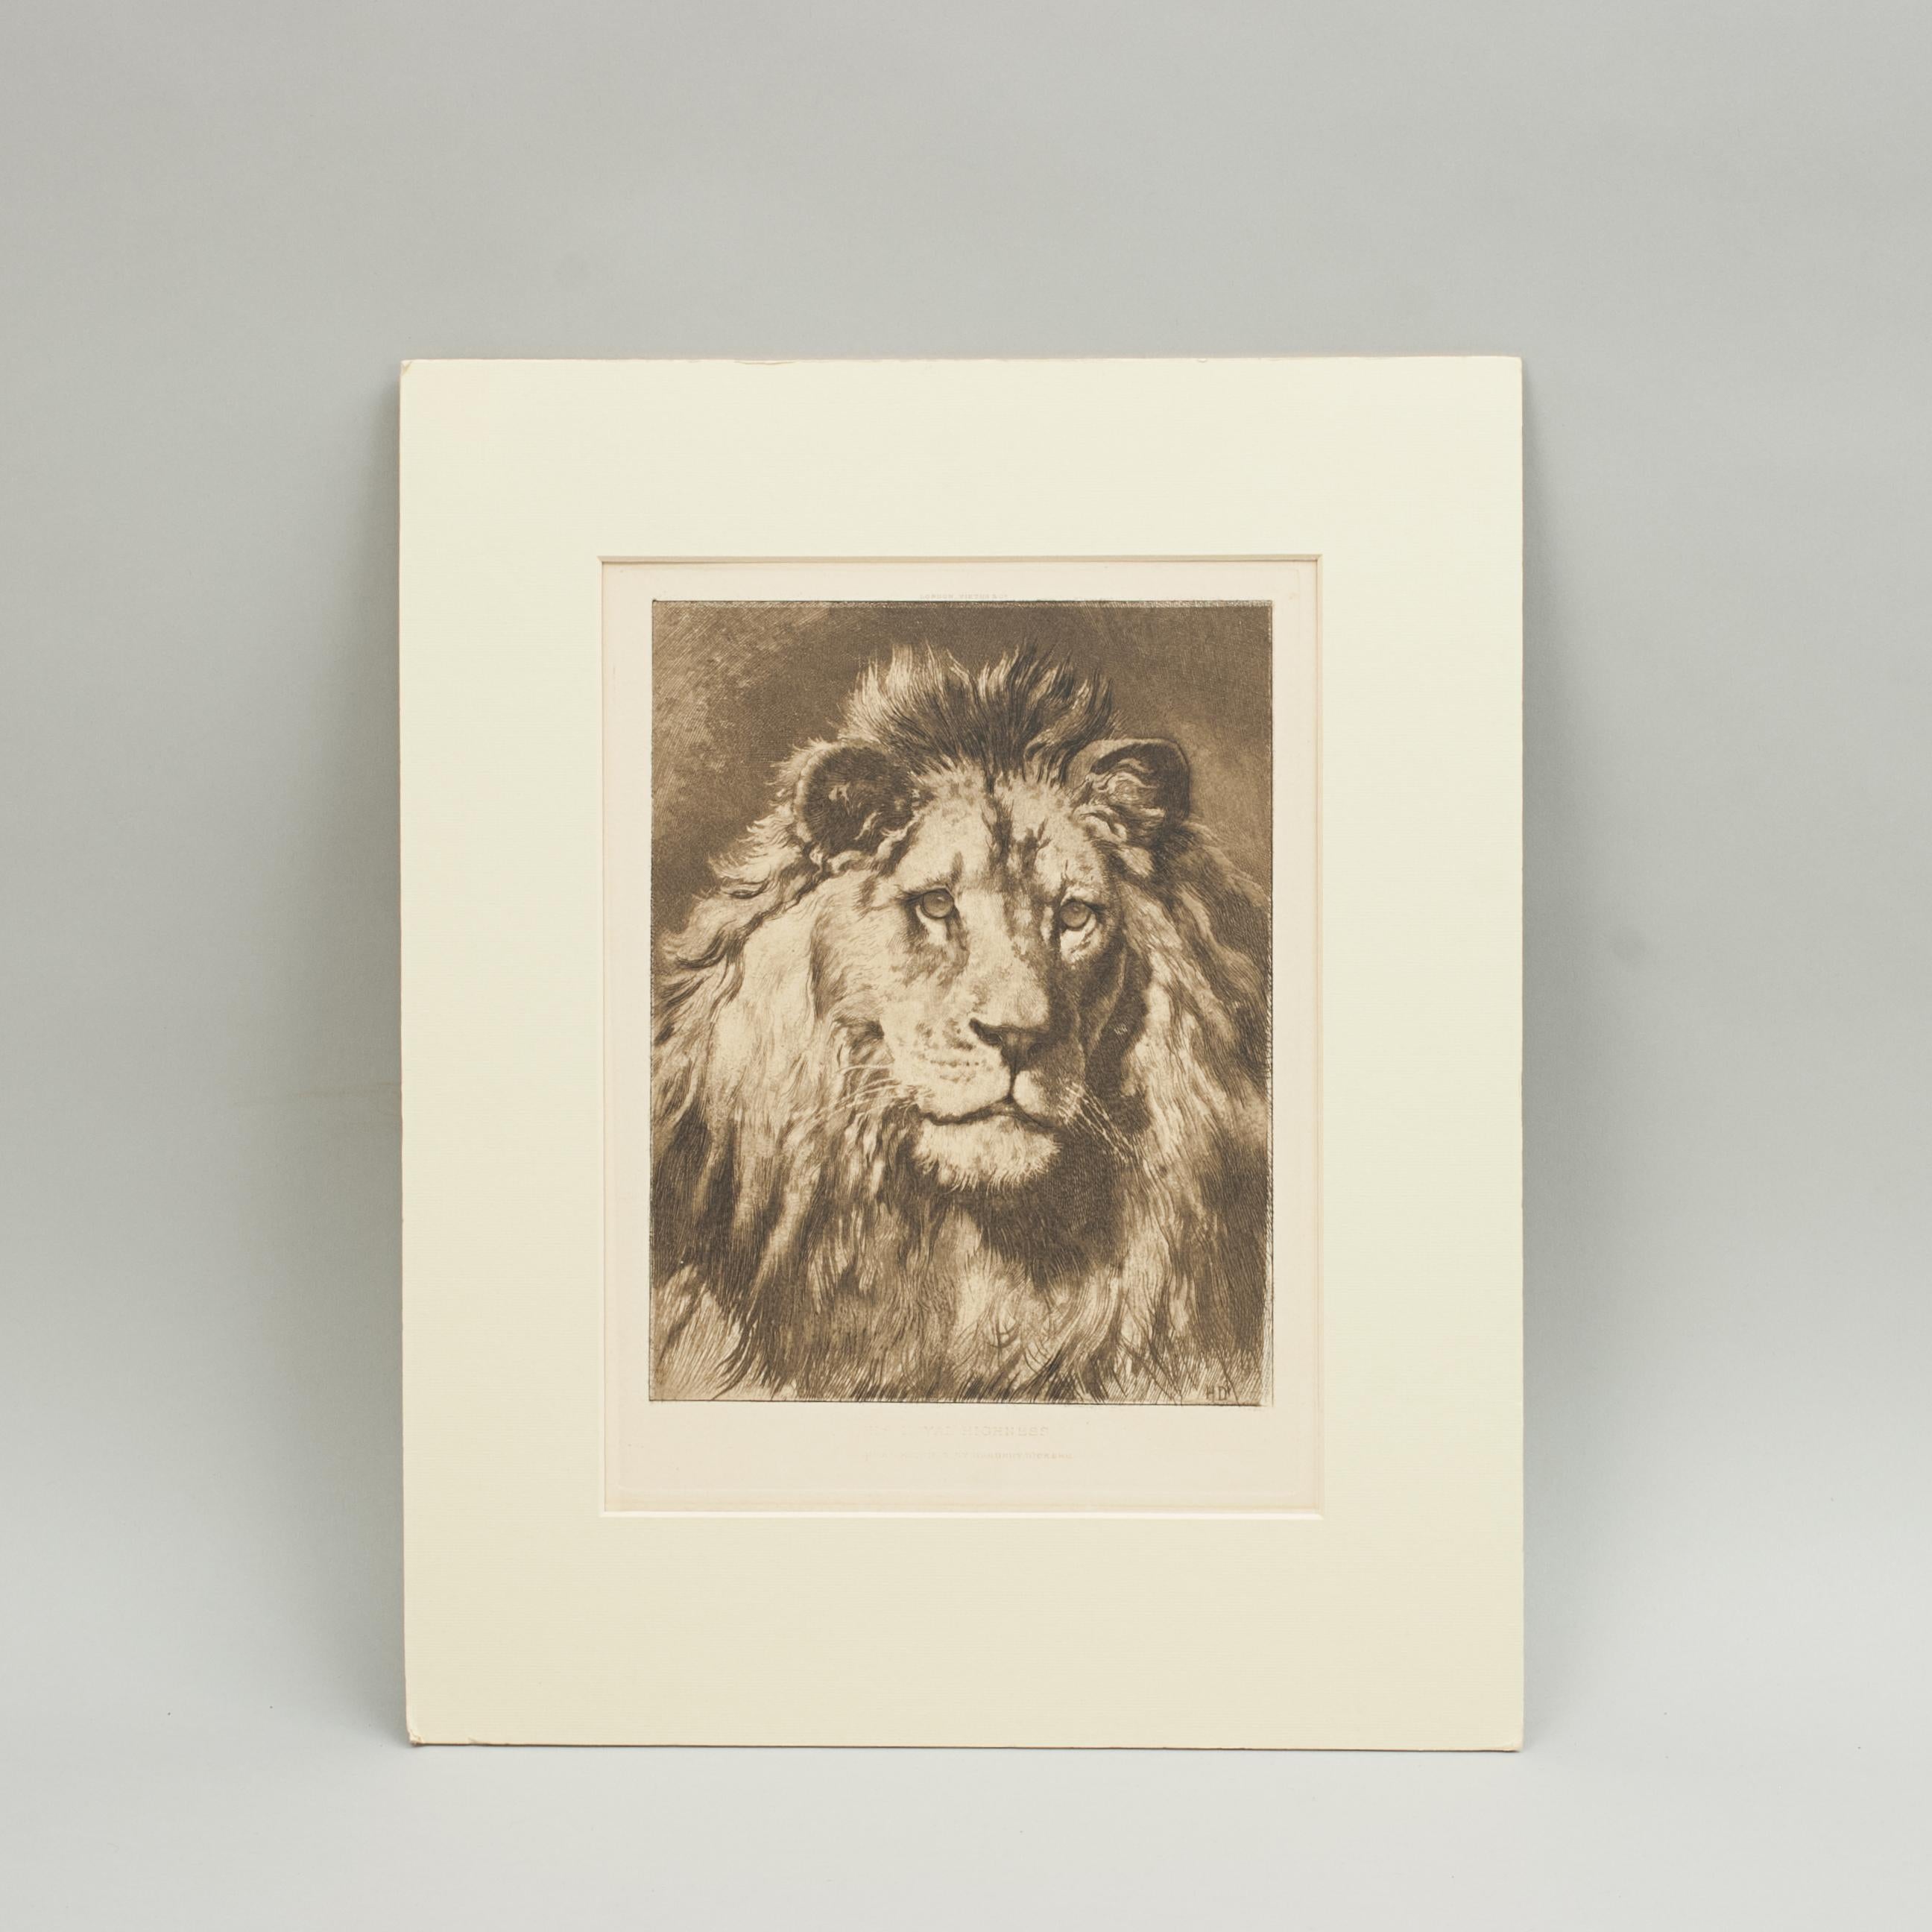 Early 20th Century Lion Print by Herbert Dicksee, His Royal Highness